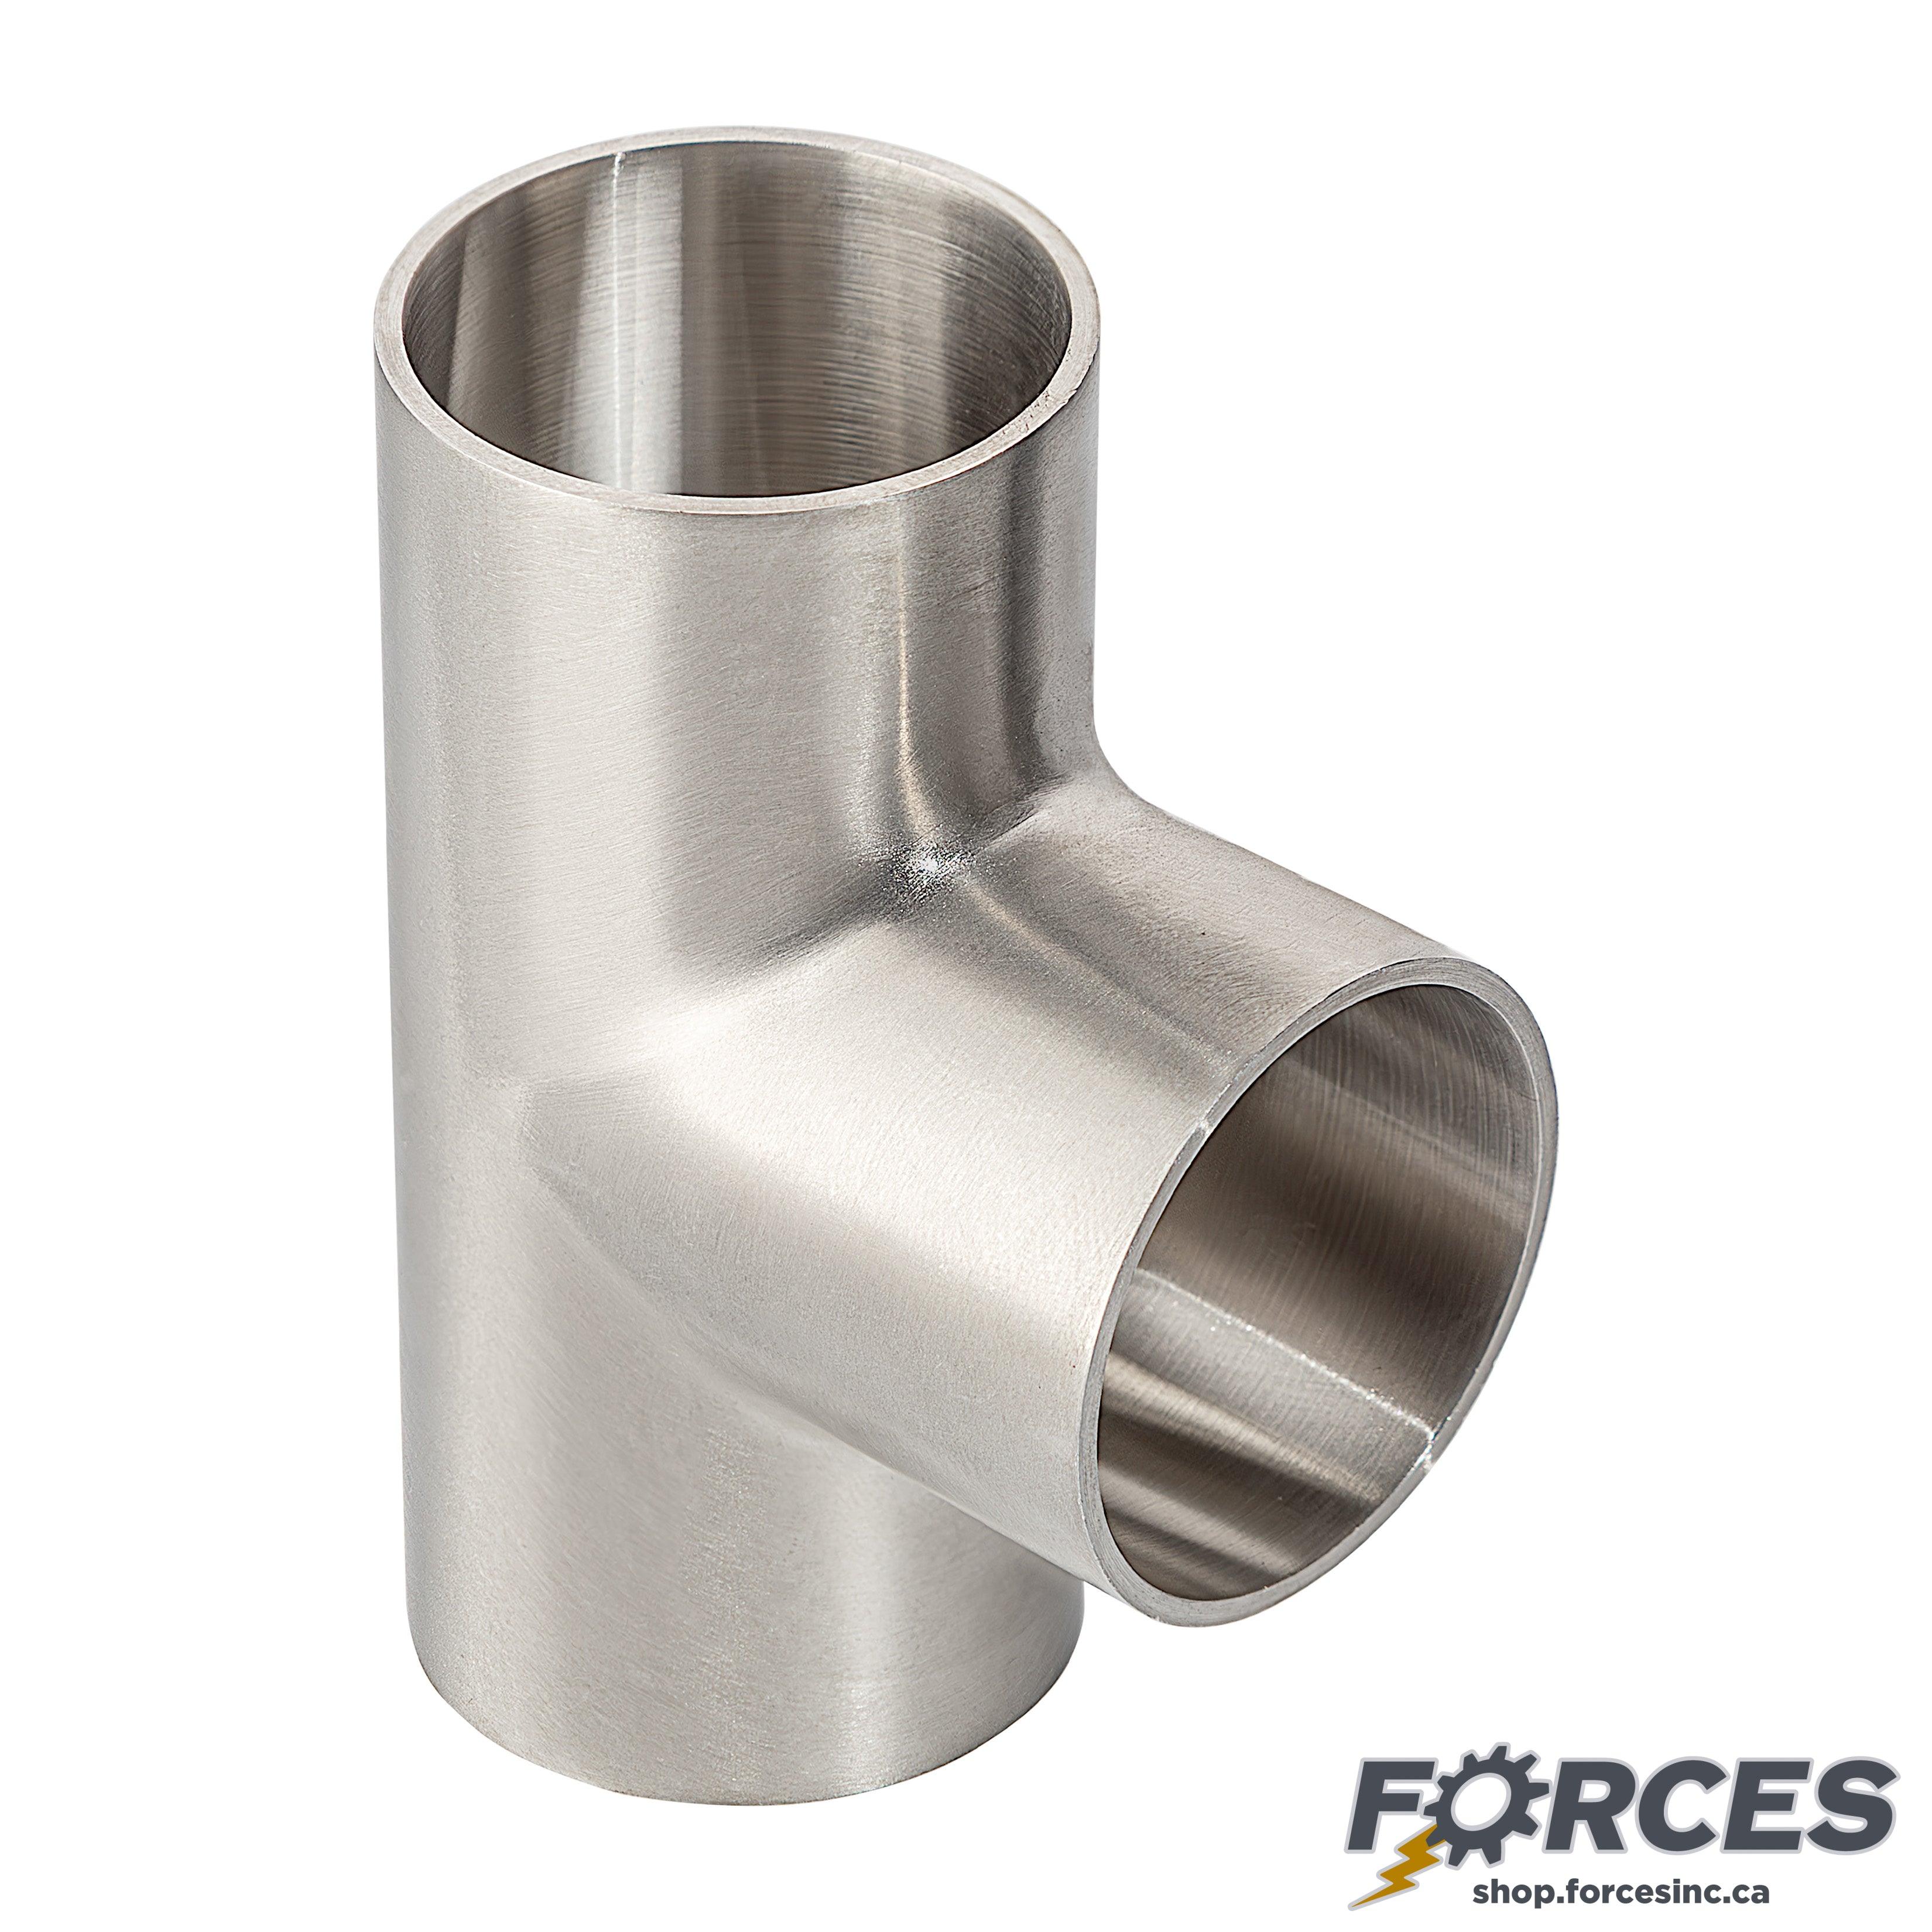 4" Butt Weld Short Tee - Stainless Steel 304 - Forces Inc